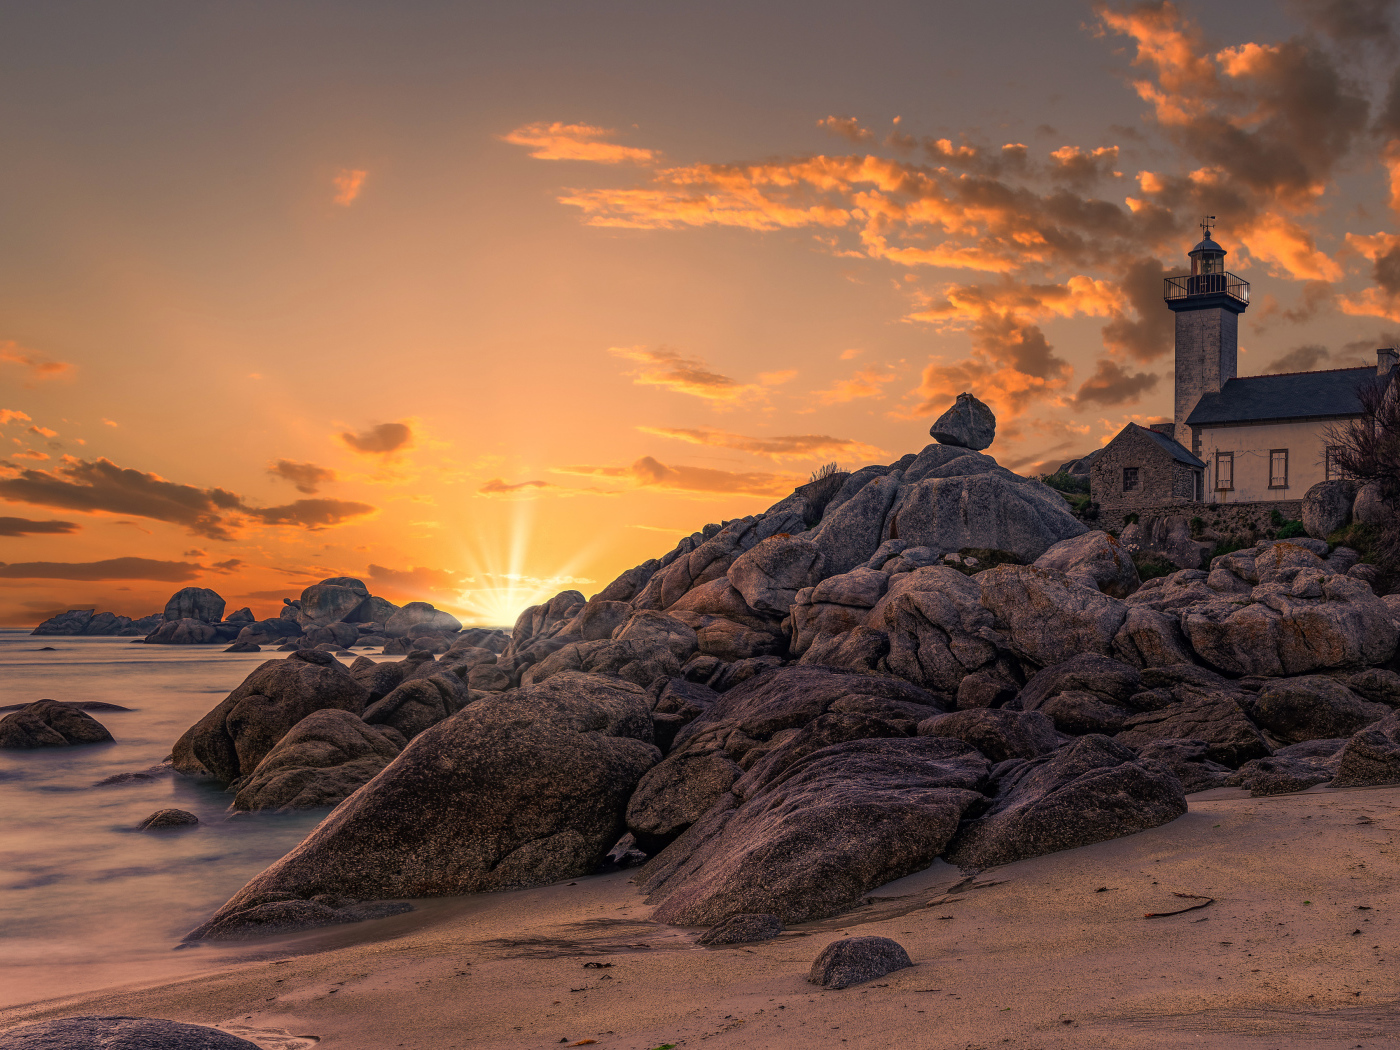 Lighthouse on the shore of a stone shore at sunset